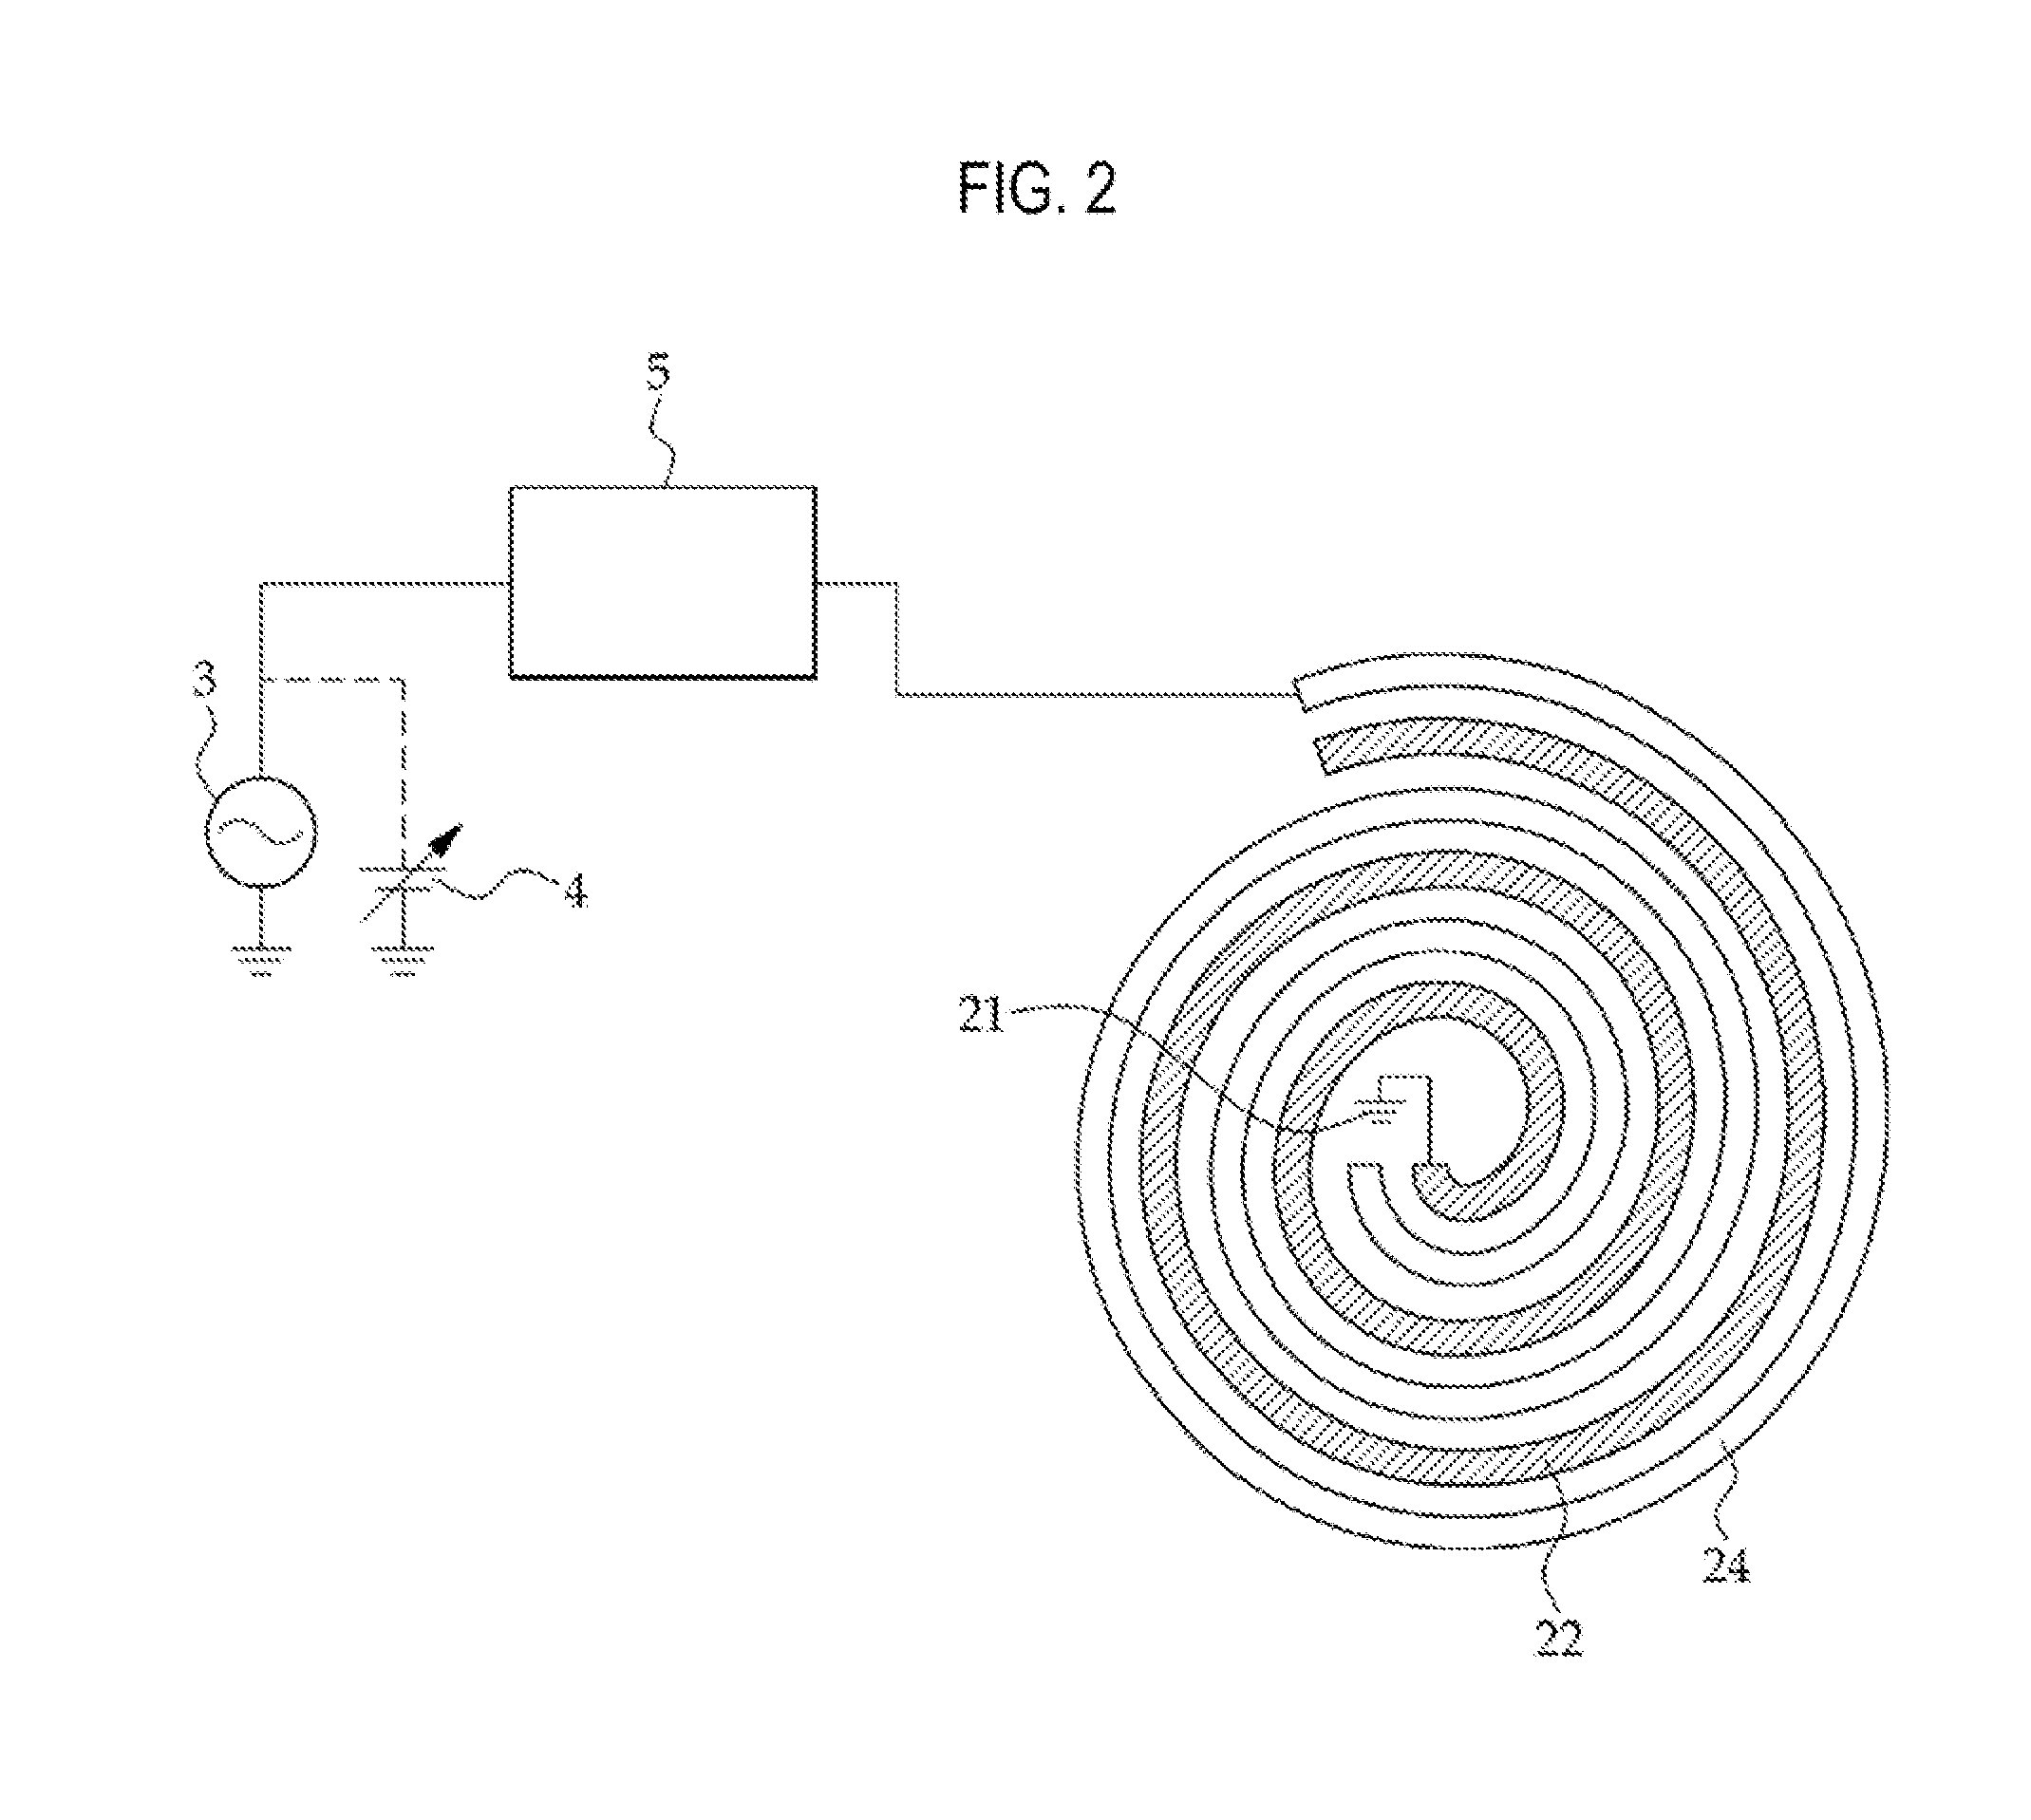 Plasma processing apparatus for vapor phase etching and cleaning